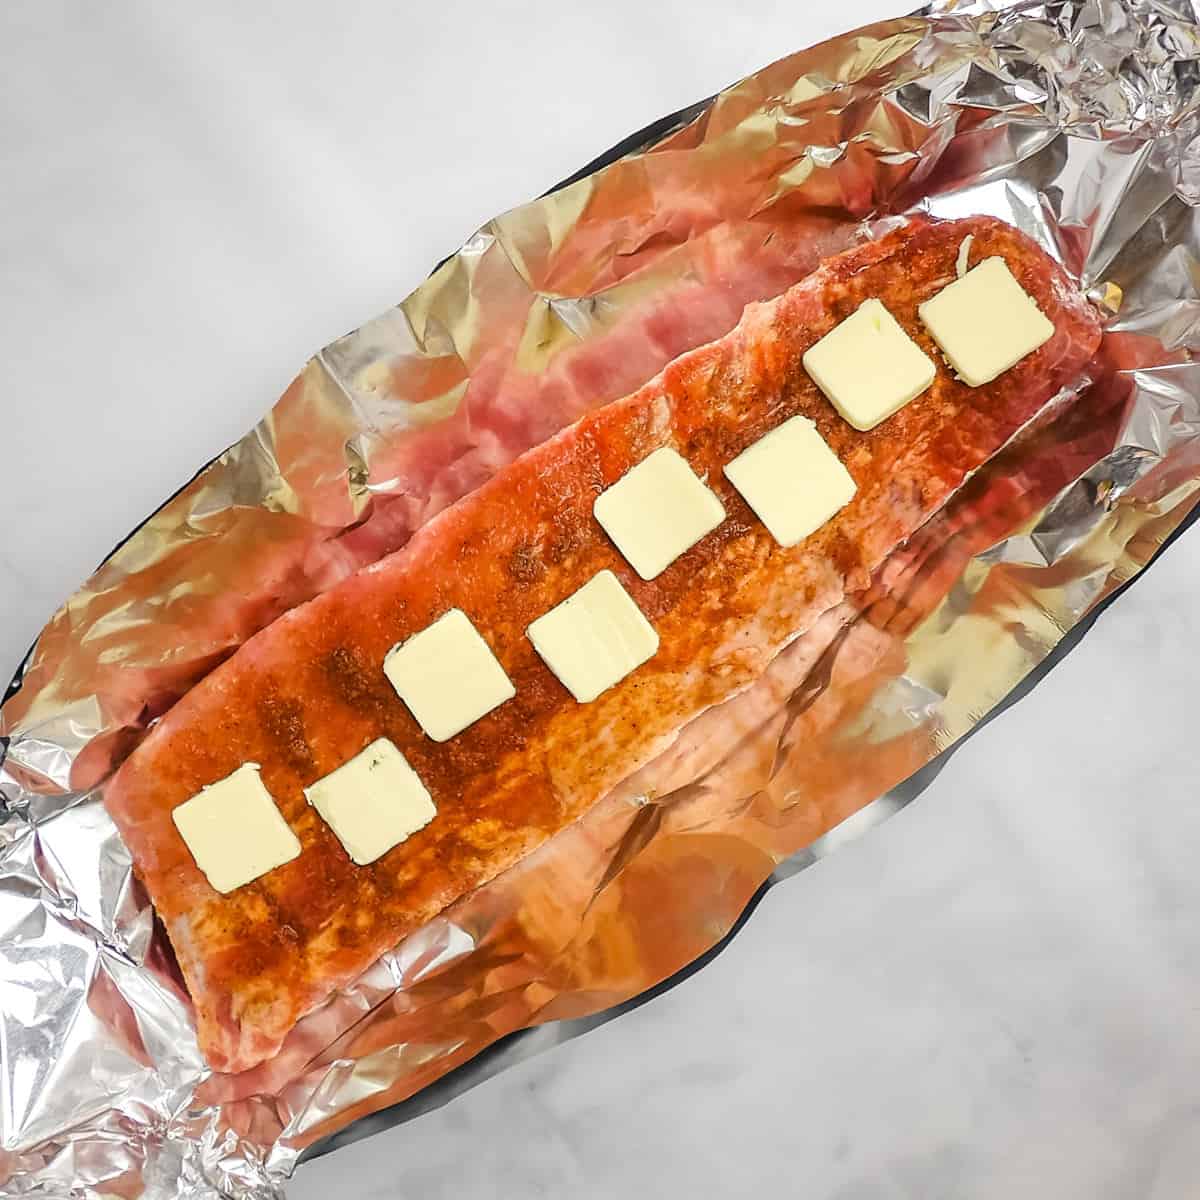 Baby back ribs in a foil boat with braising liquid ingredients on top.